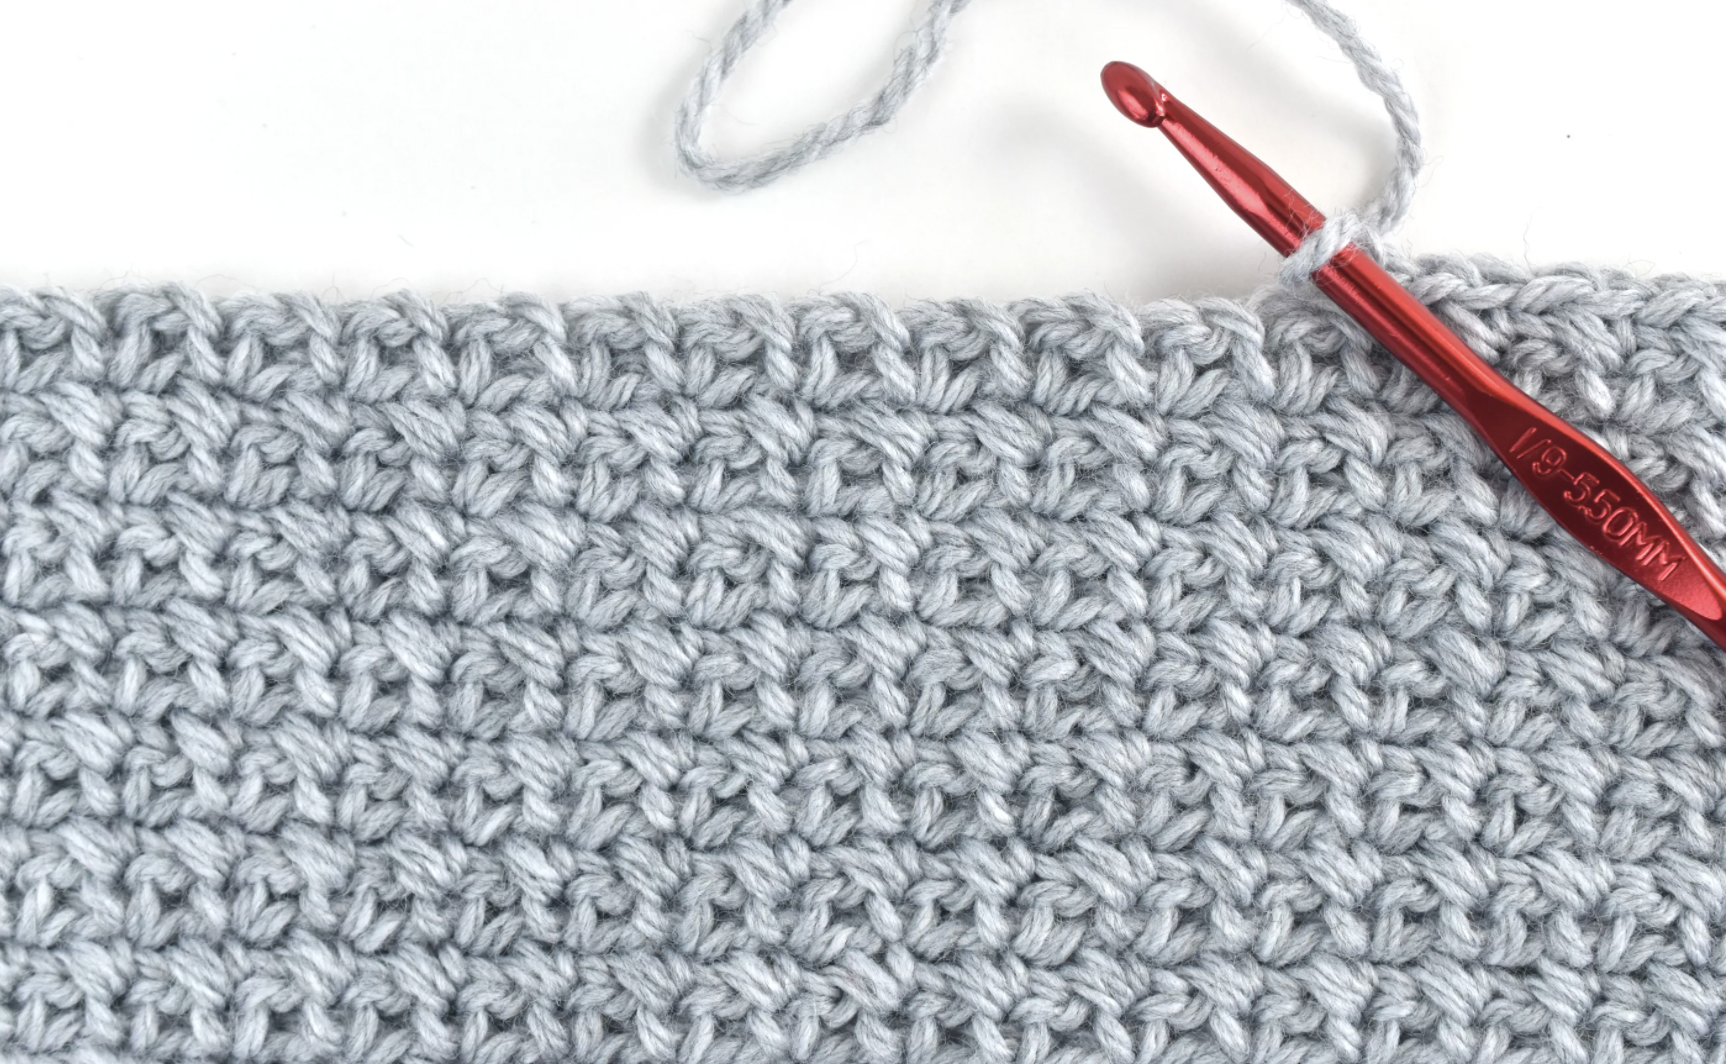 6 Basic Crochet Stitches for Beginners (Learn These First!)